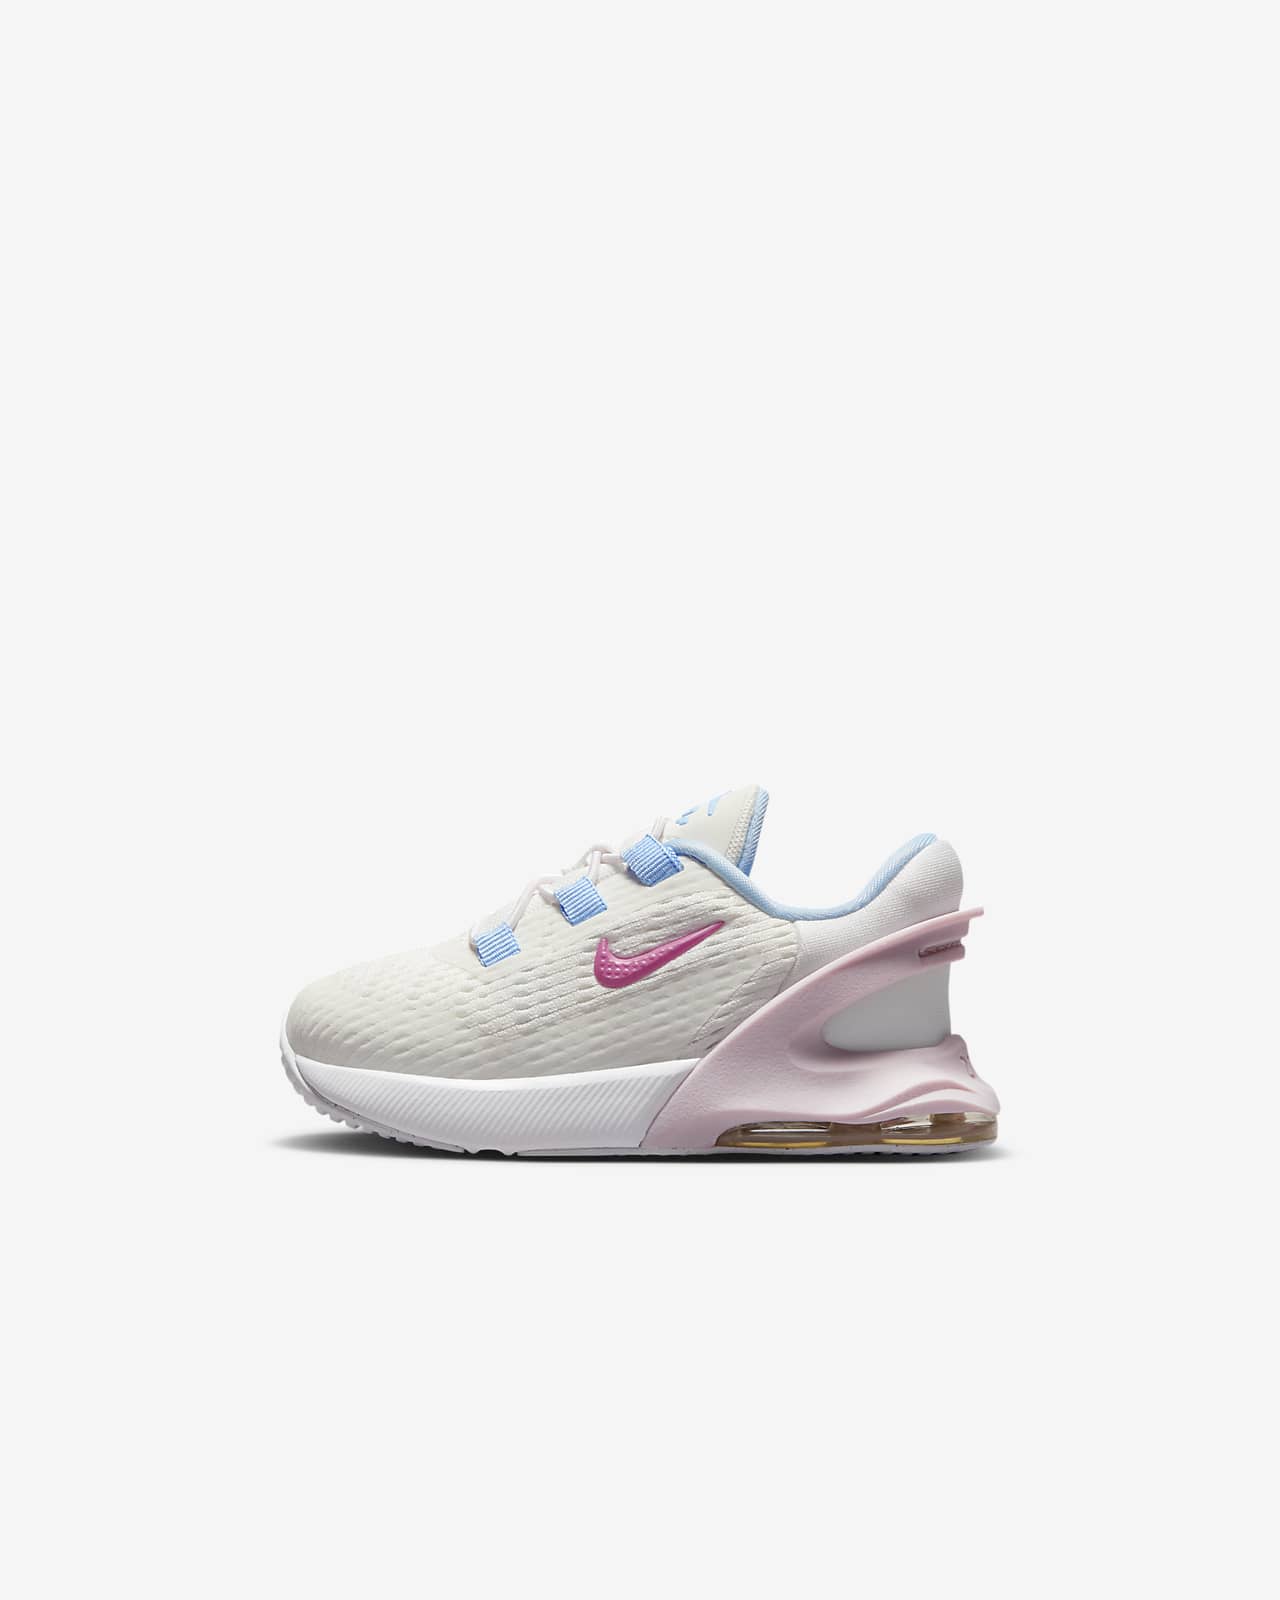 Nike Air Max 270 GO Baby/Toddler Easy On/Off Shoes